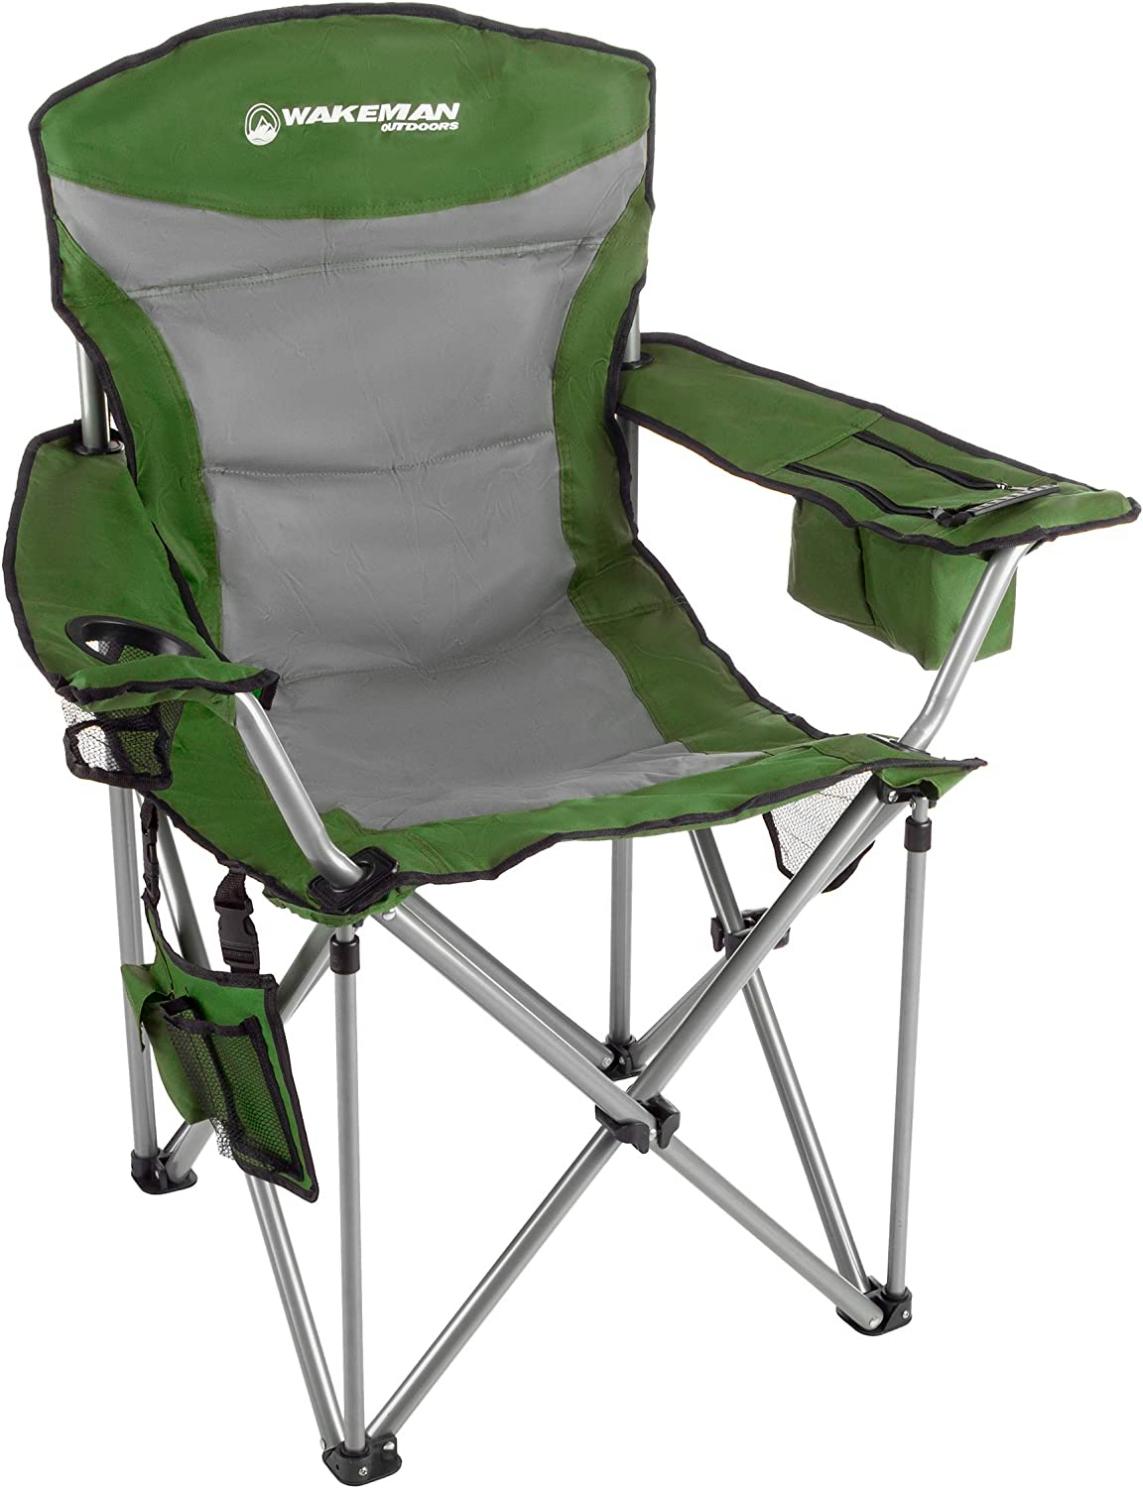 Wakeman Outdoors Heavy Duty Camp Chair-850lb High Weight Capacity Big Tall Quad Seat-Cup Holder, Cooler, Carrying Bag-Tailgating, Camping, Fishing